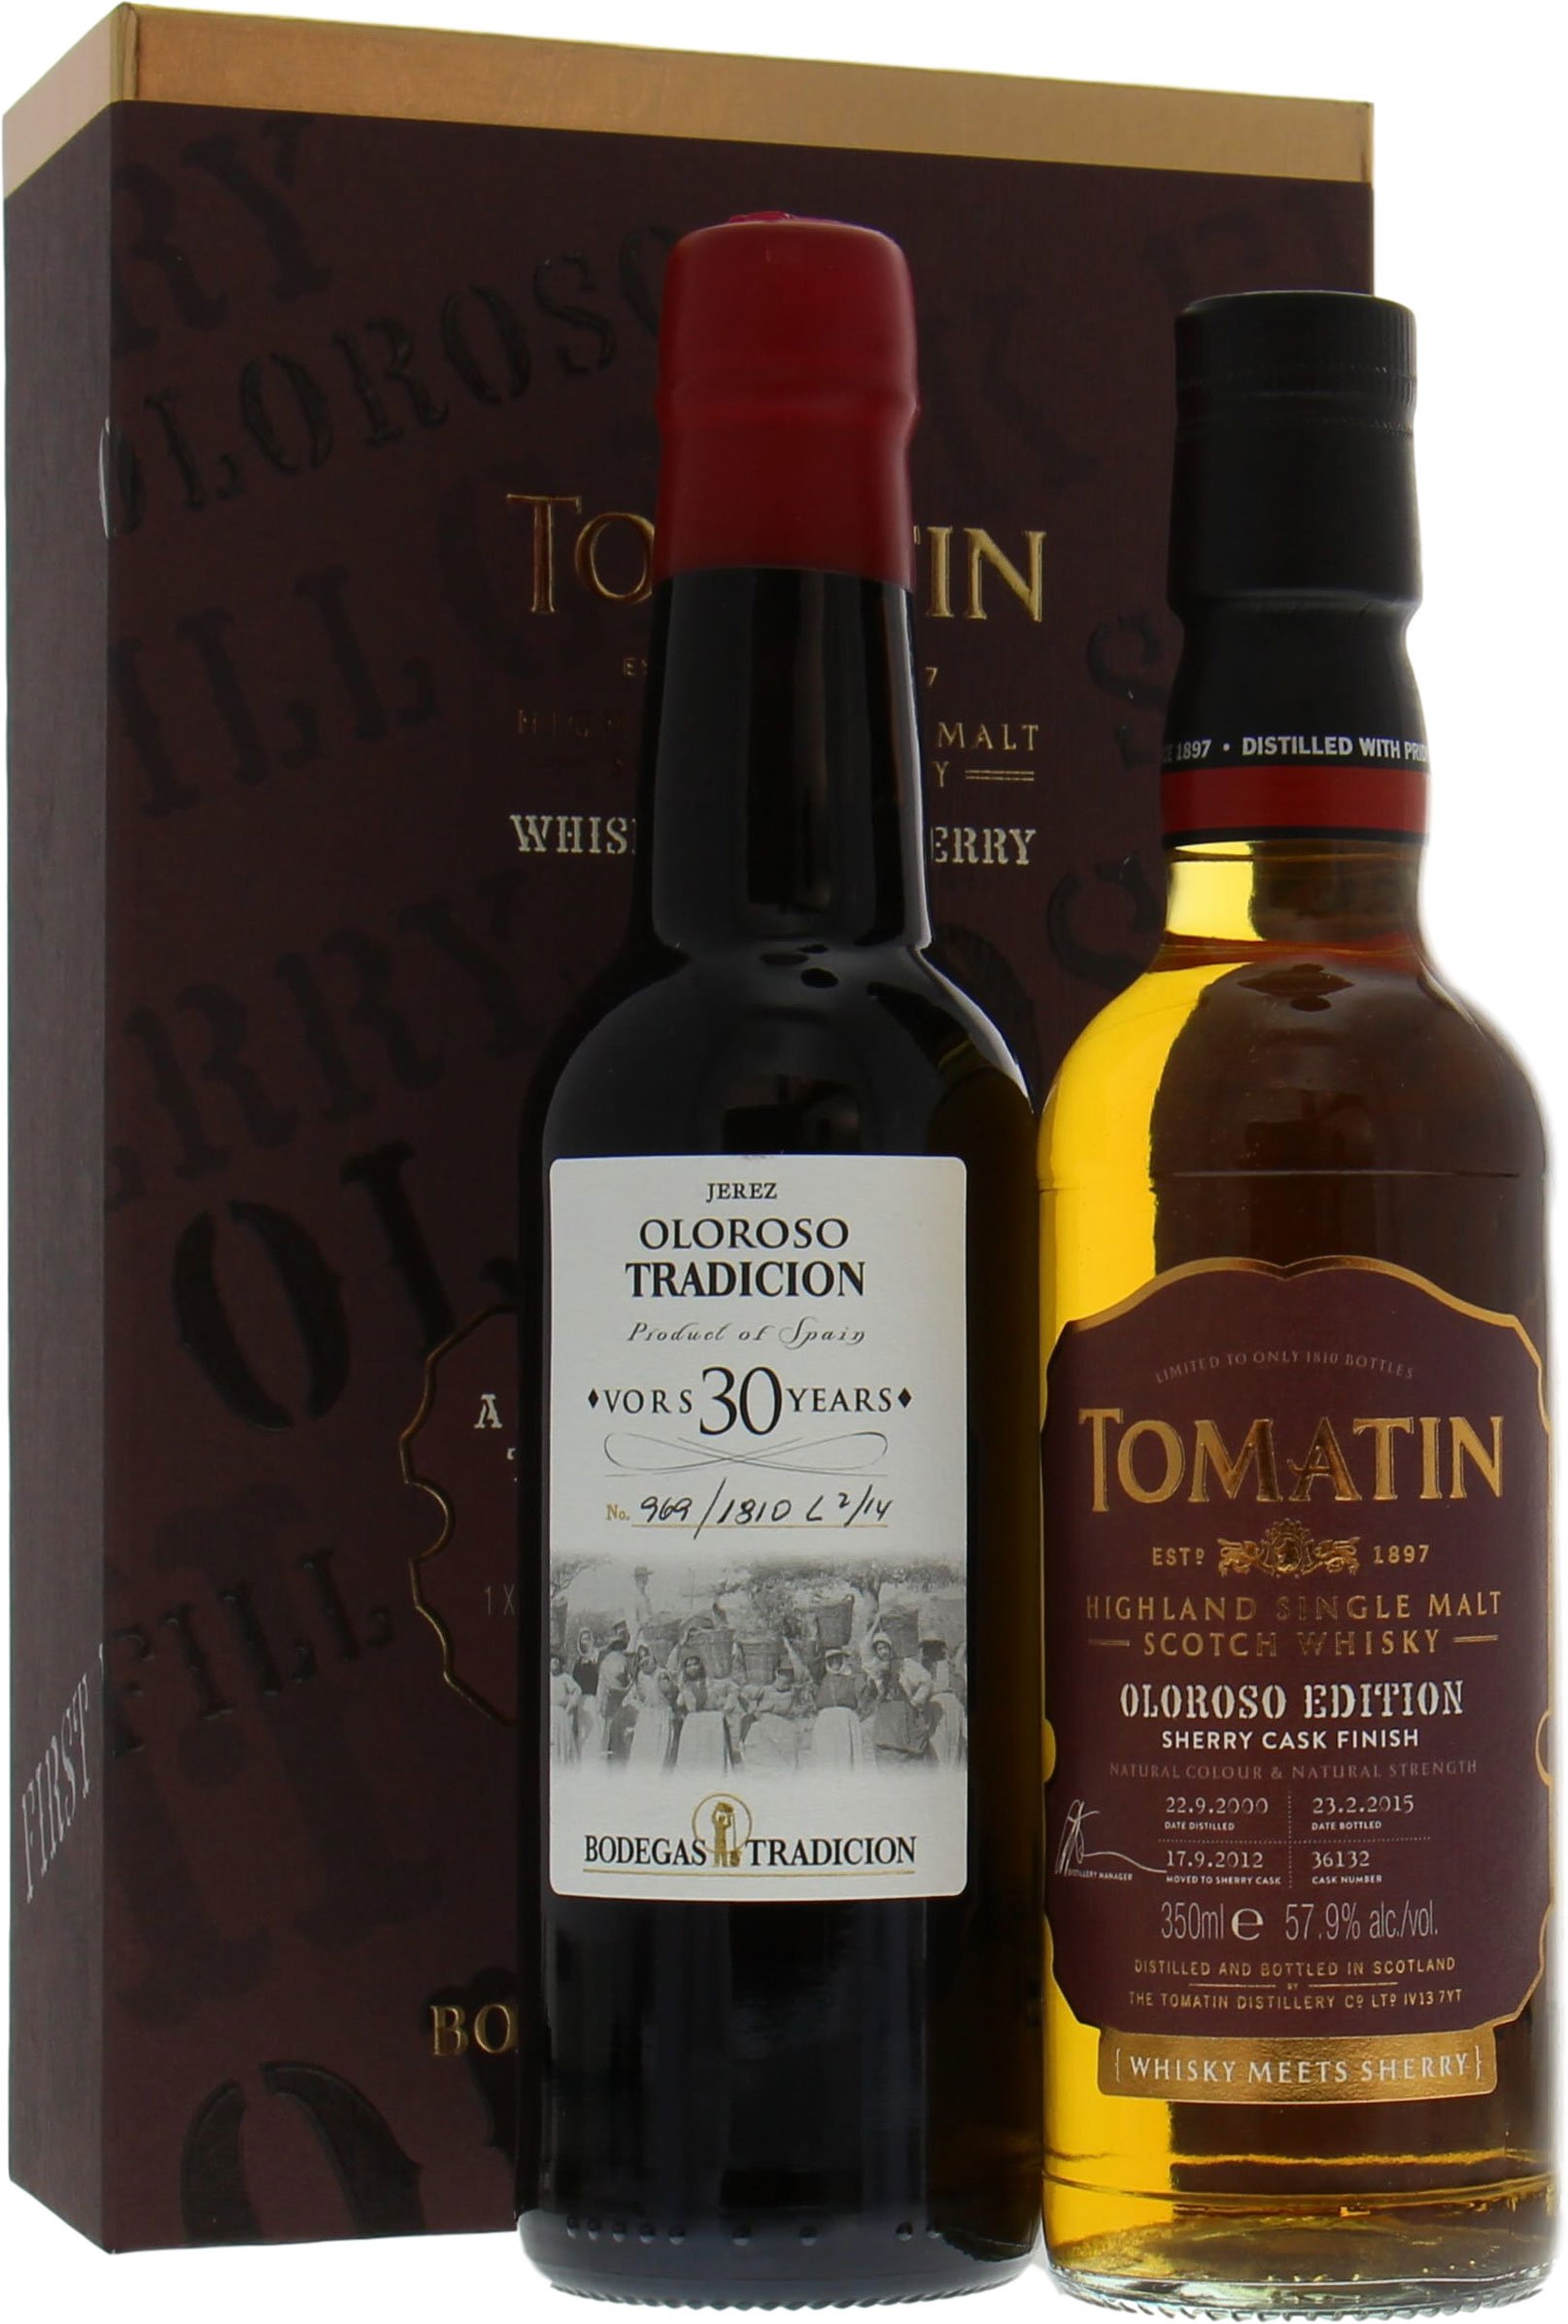 Tomatin - Whisky Meets Sherry Edition 14 Years Cask 36132 2000 In Original Container